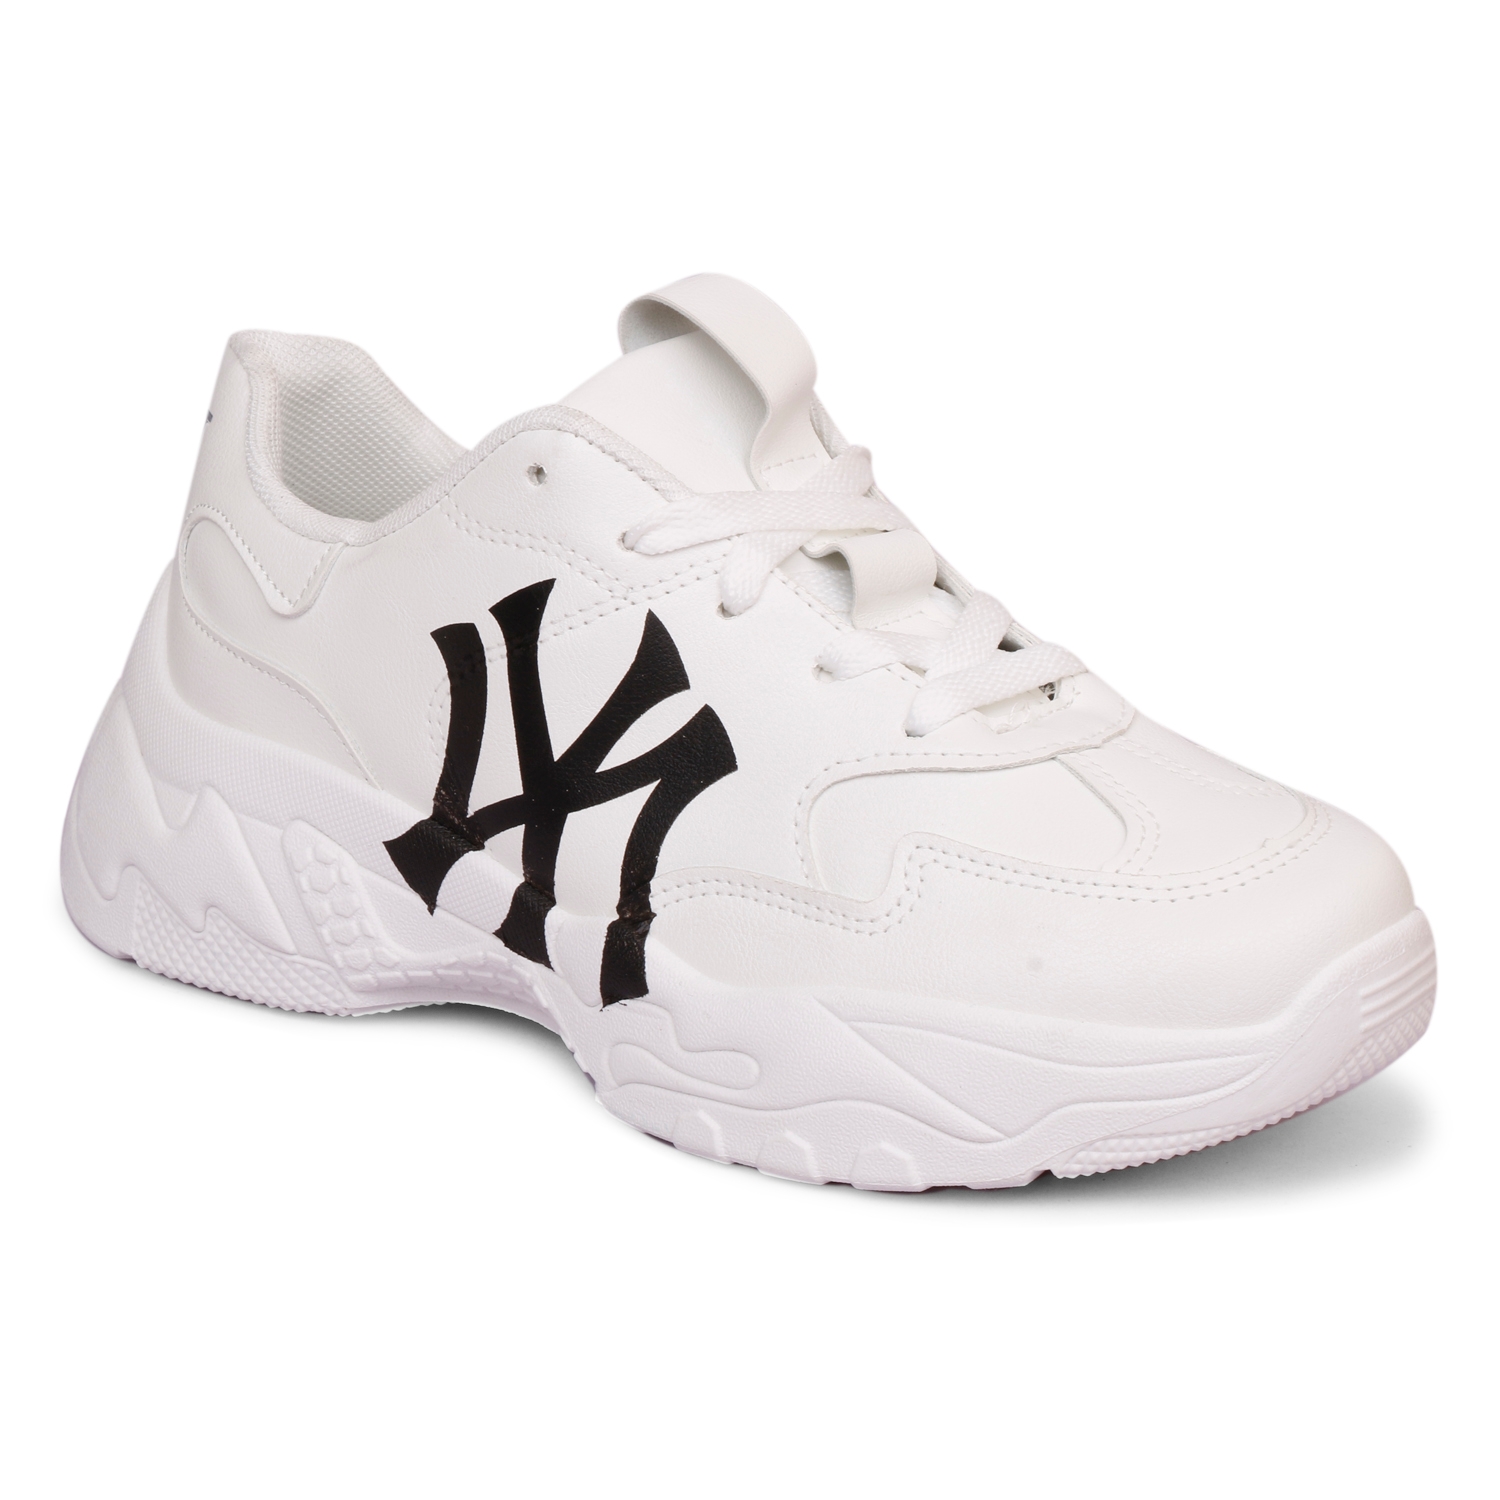 MOZAFIA | MOZAFIA WhiteBlack Lace up Latest Stylish Casual Lightweight Sneakers for Walking, Gym For Women